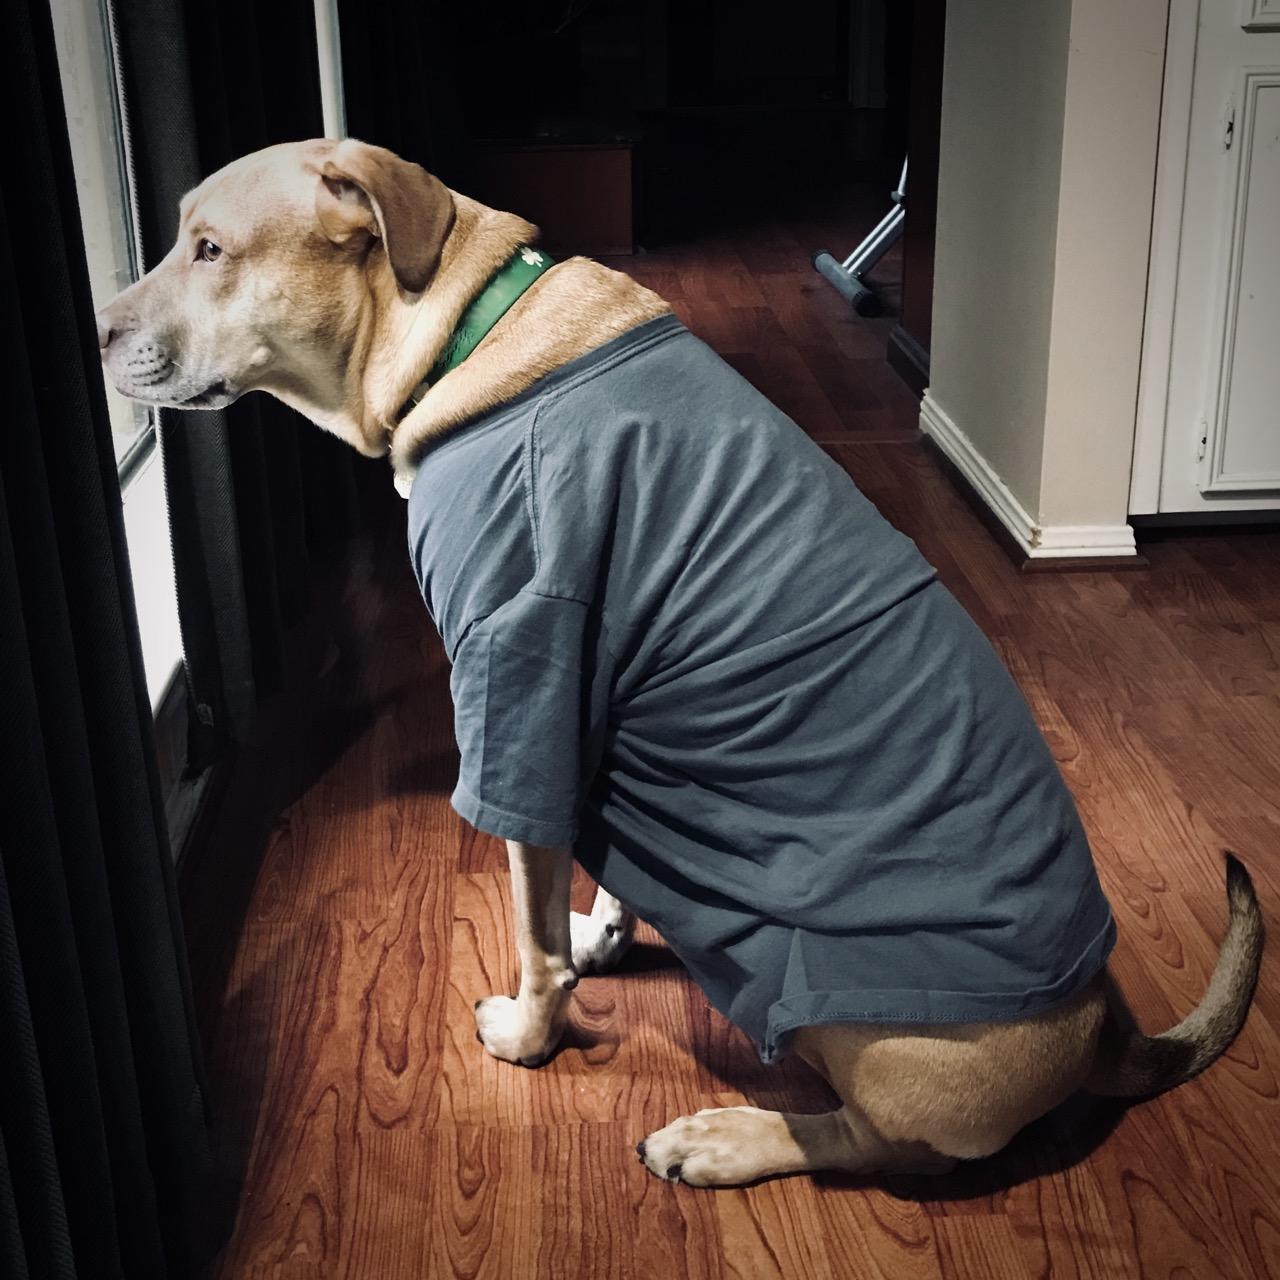 Murphy in a Thunder Shirt Looks Out the Window